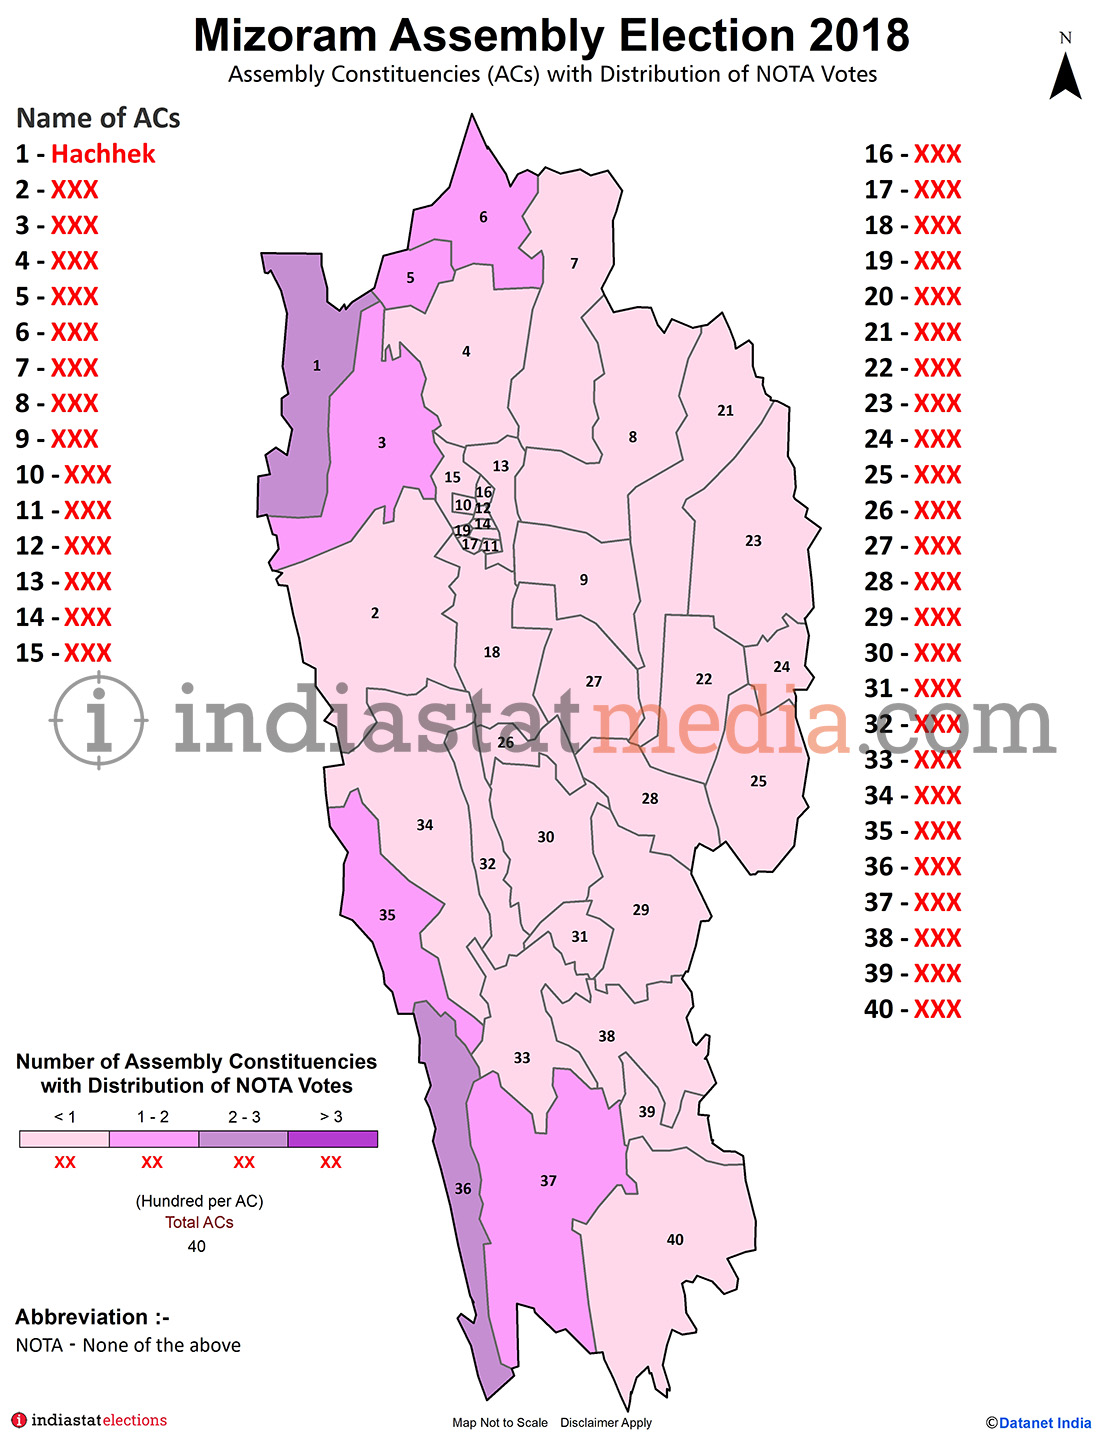 Distribution of NOTA Votes by Constituencies in Mizoram (Assembly Election - 2018)